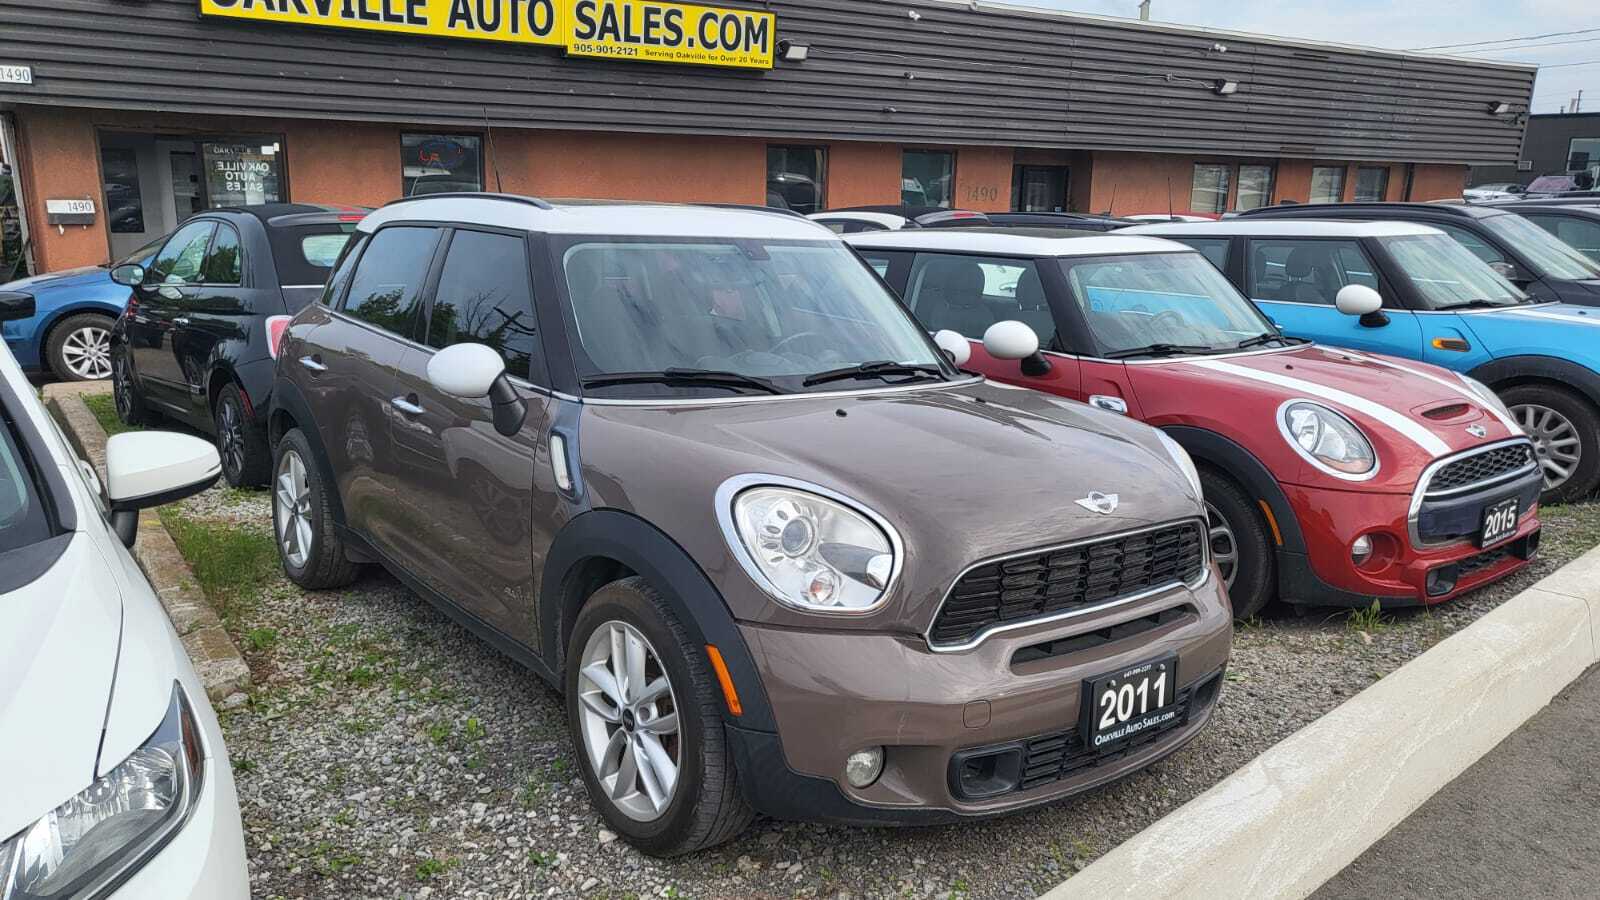 2011 MINI Cooper Countryman AWD 4dr S ALL4 PANOROOF BLUETOOTH CERTIFIED